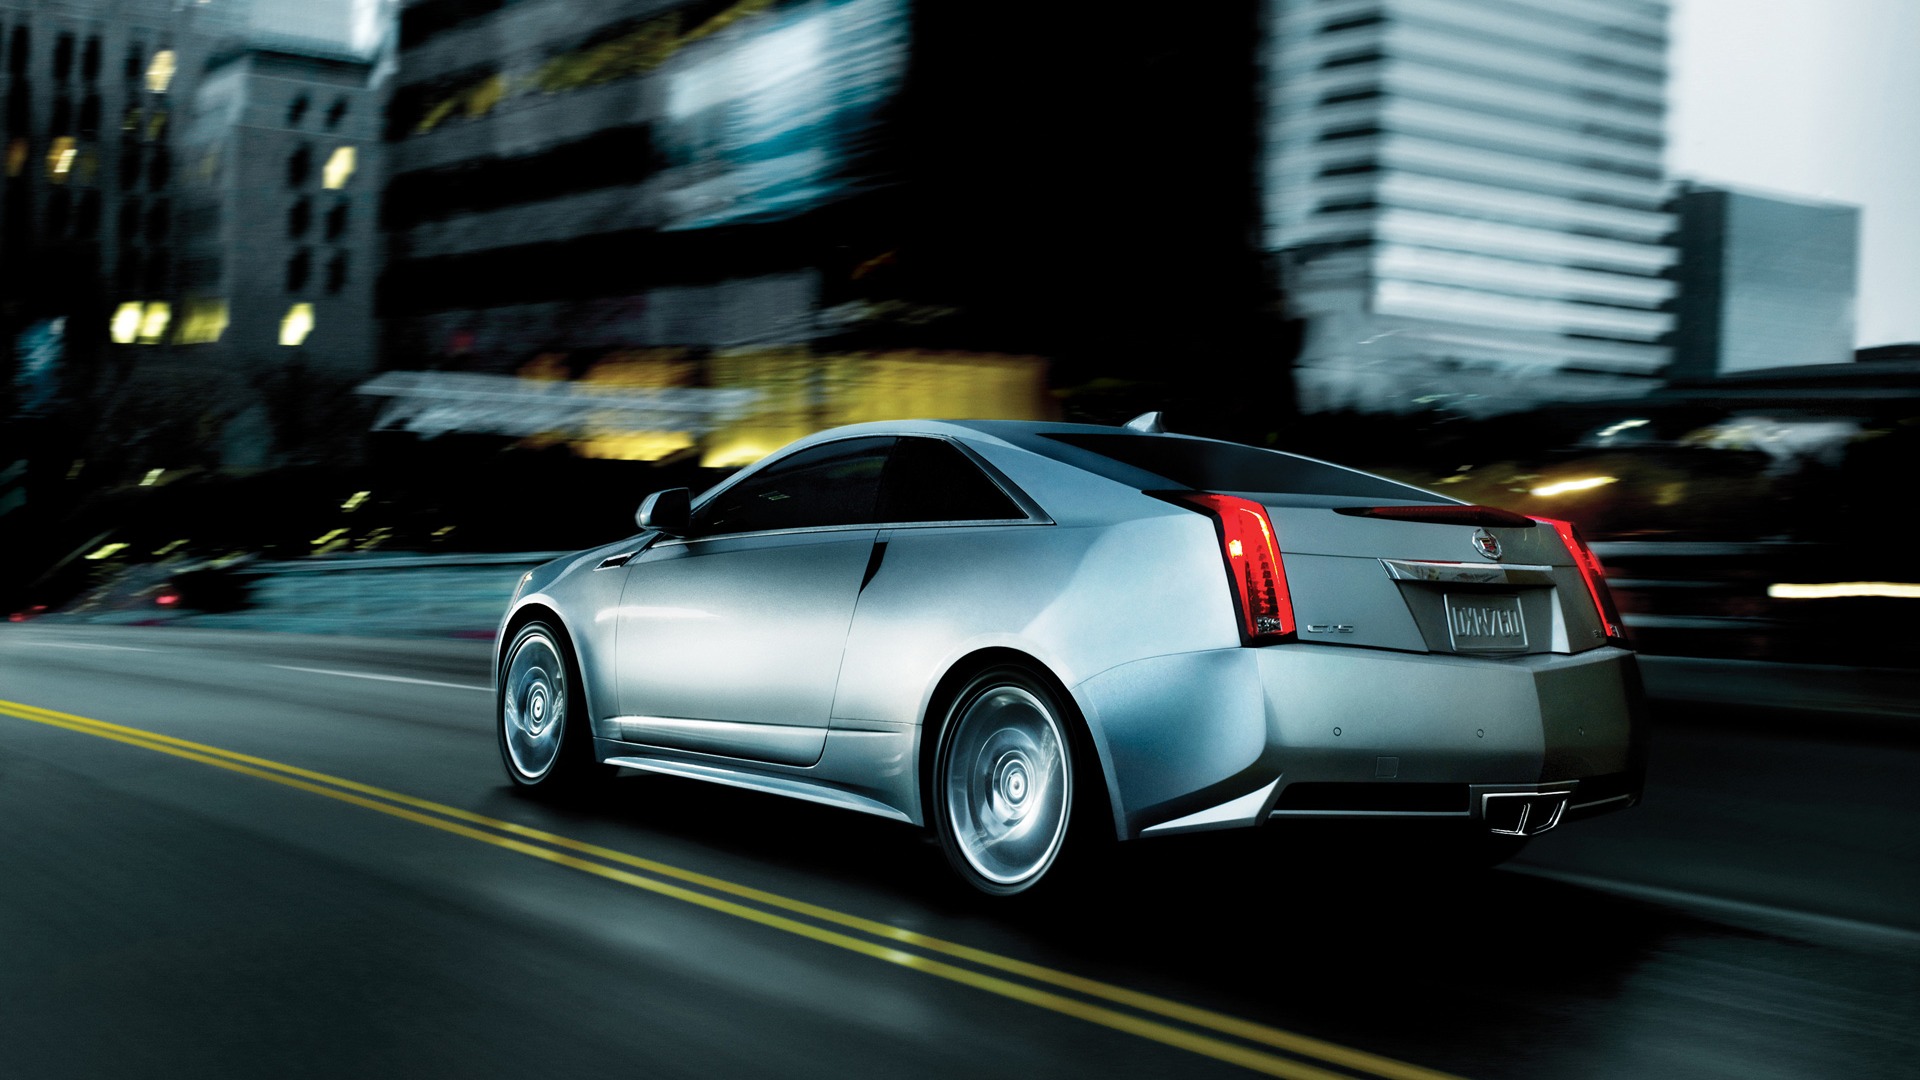 Cadillac CTS Coupe - 2011 HD Wallpaper #1 - 1920x1080